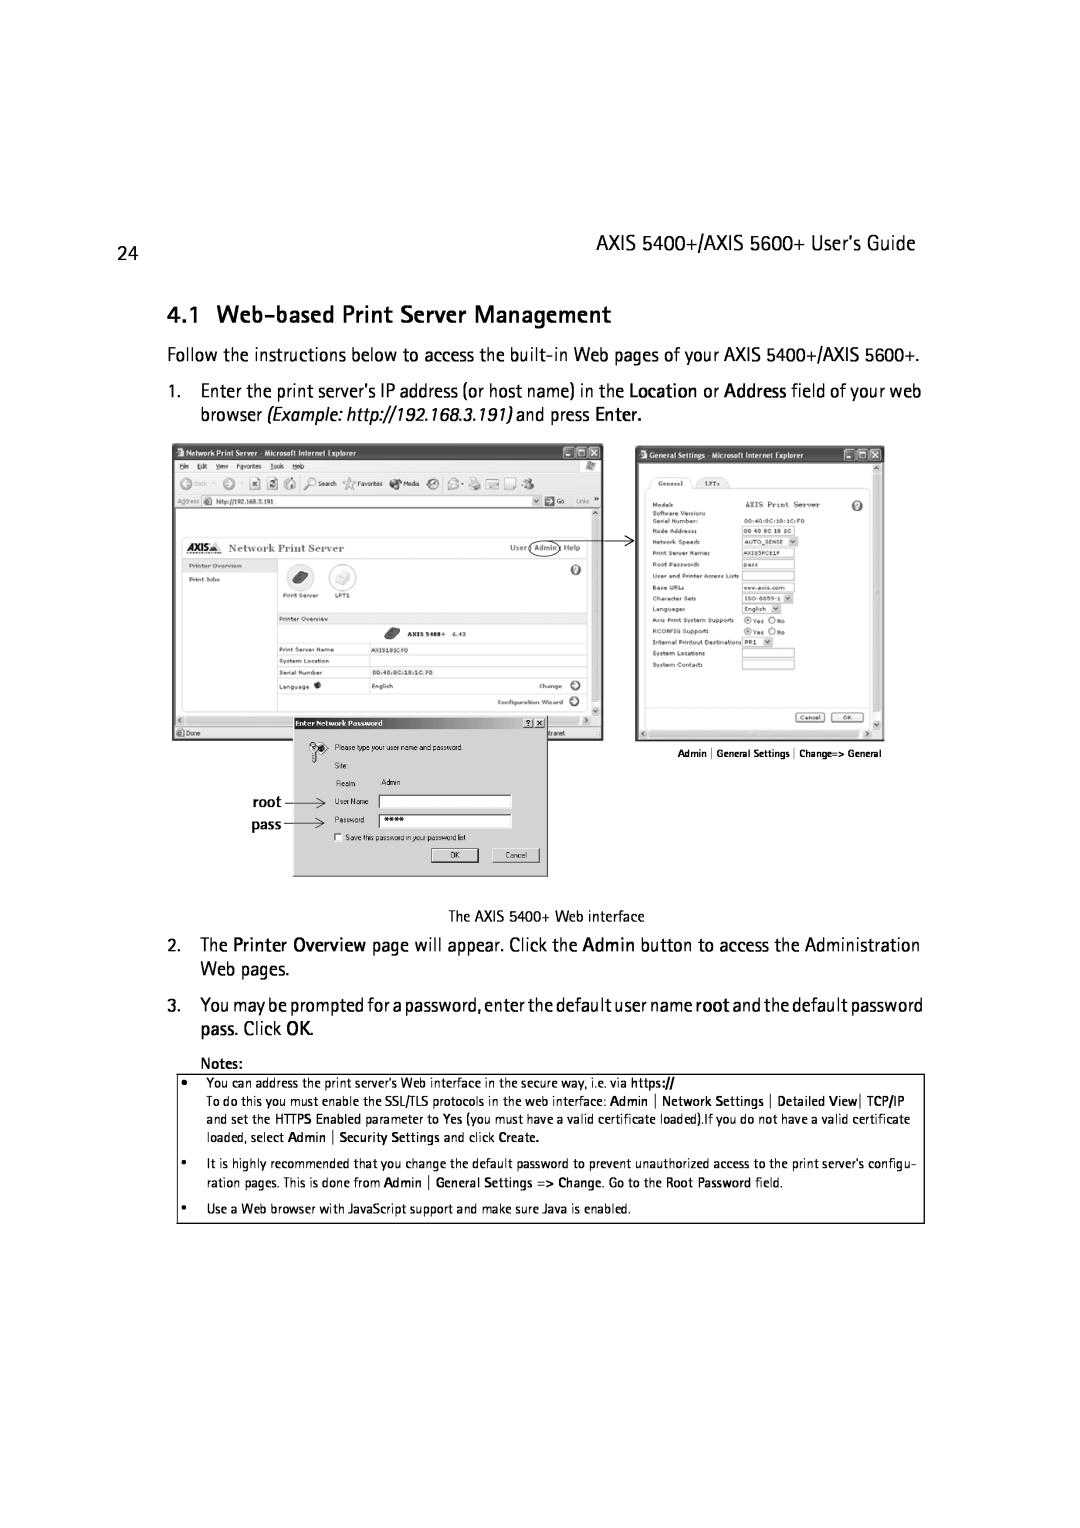 Dell 5600+, 5400+ manual Web-based Print Server Management, root pass 